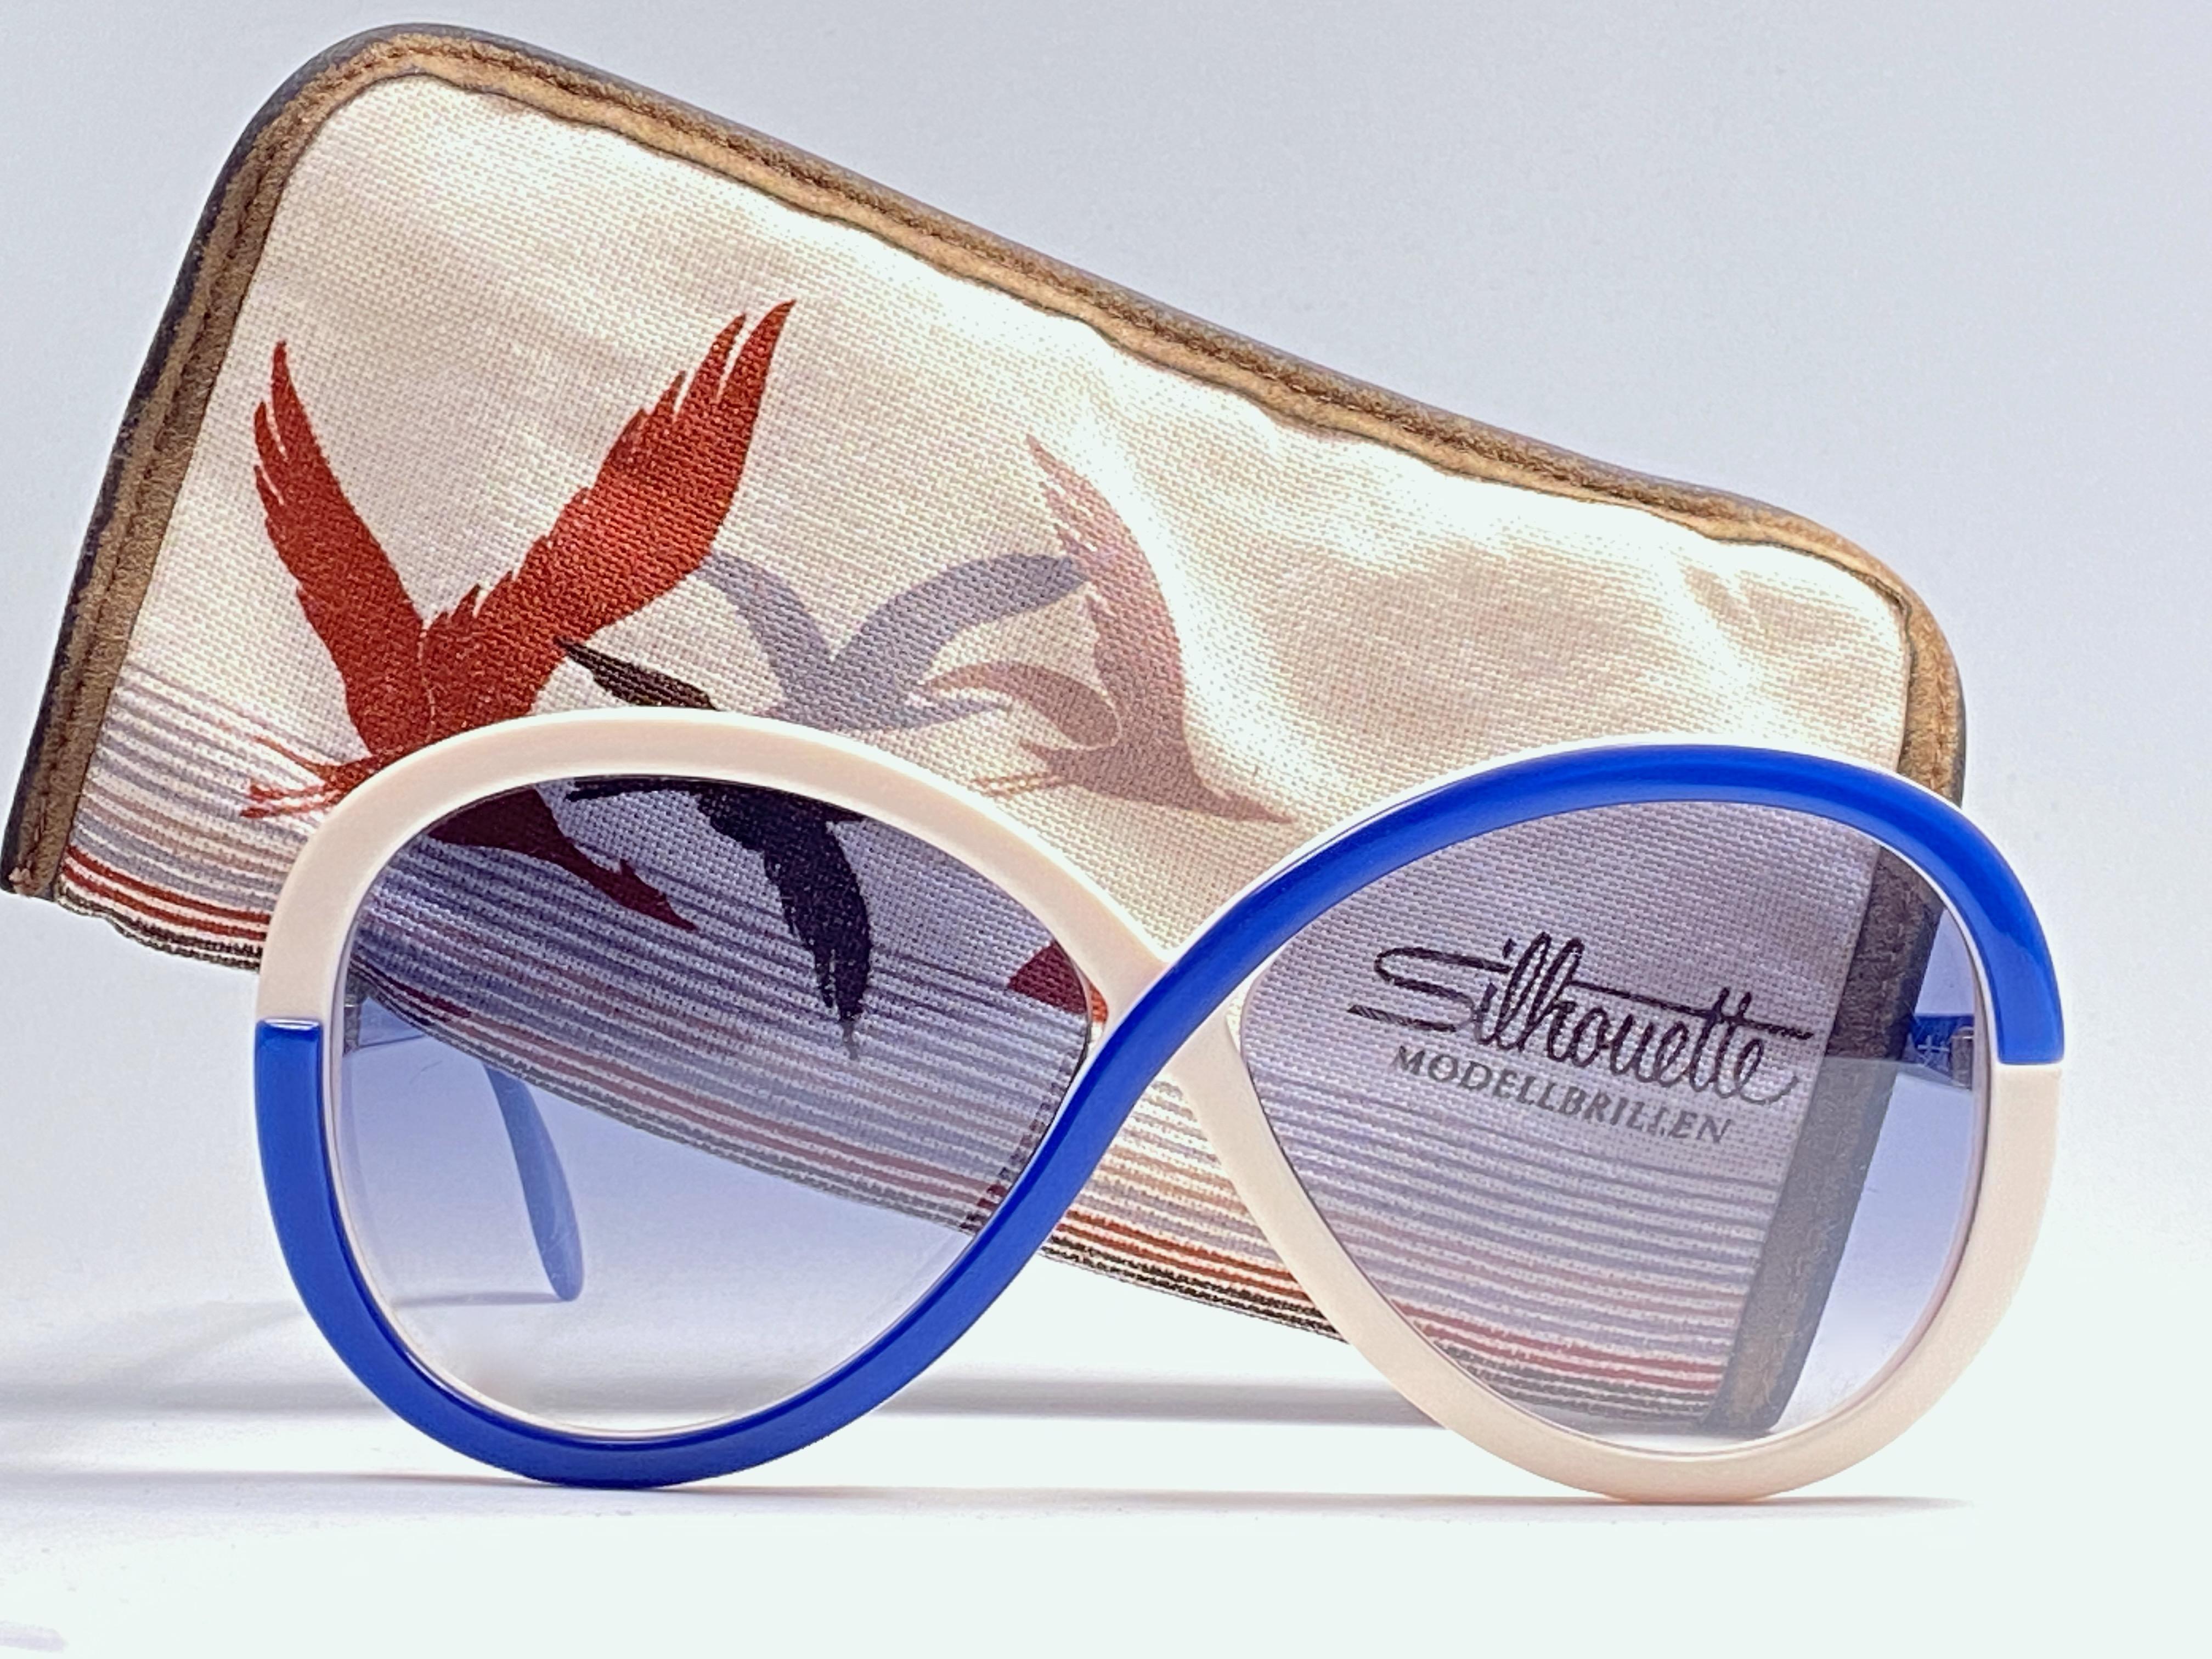 New Vintage Collector Item Silhouette Infinity Interlocking white and blue frame holding a spotless pair of light blue lenses.   

Made in Germany in 1970's.

This pair may show minor sign of wear due to storage.